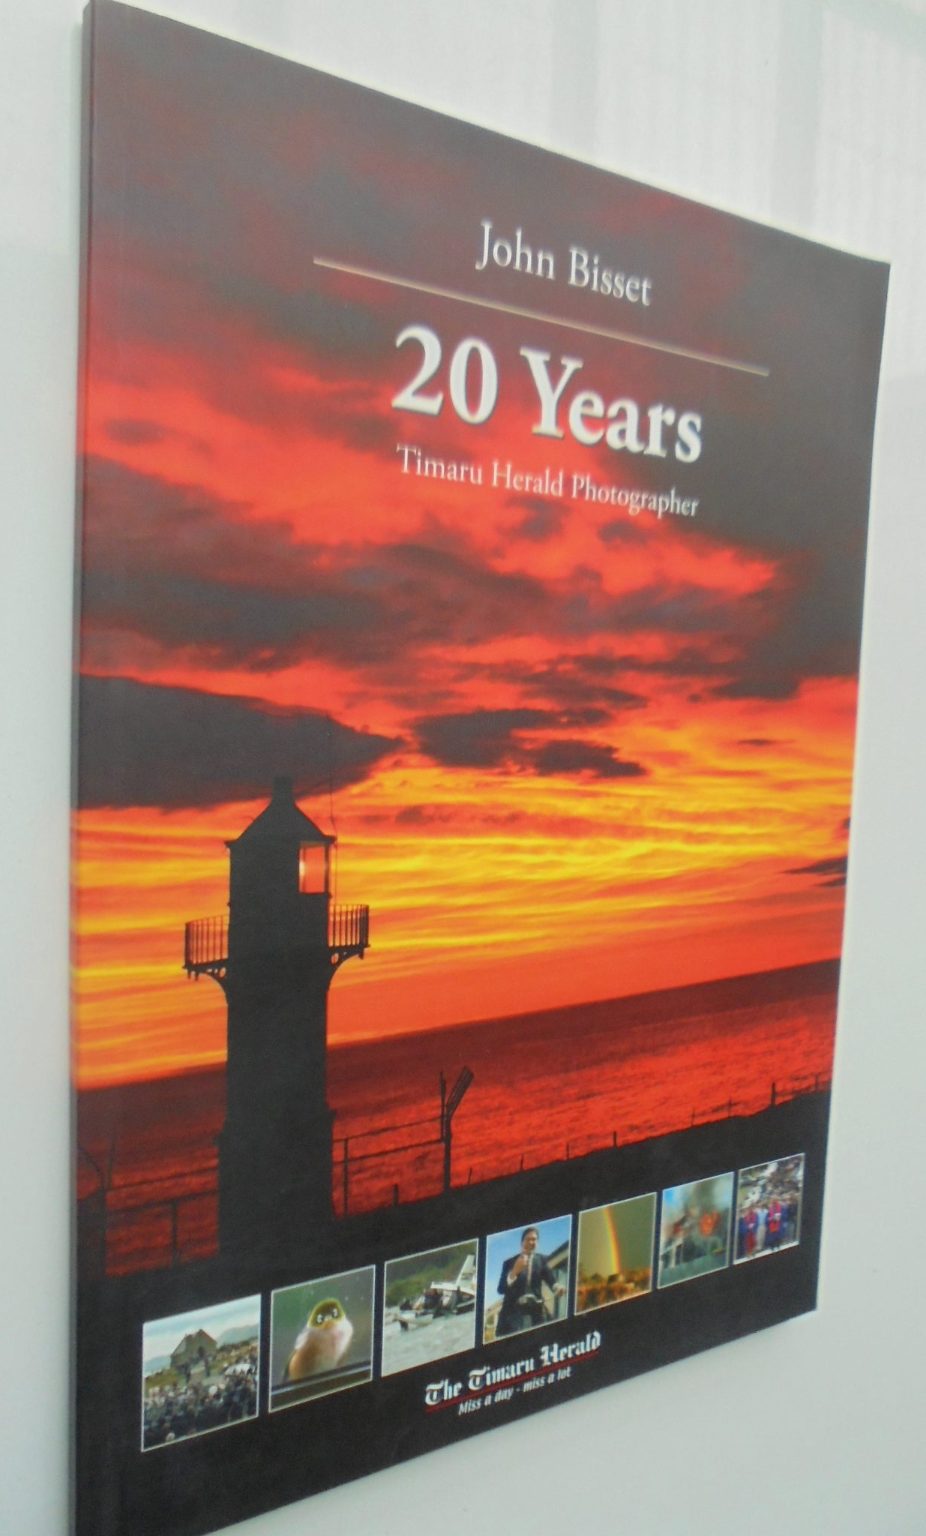 20 years Timaru Herald Photographer. SIGNED by author John Bisset.